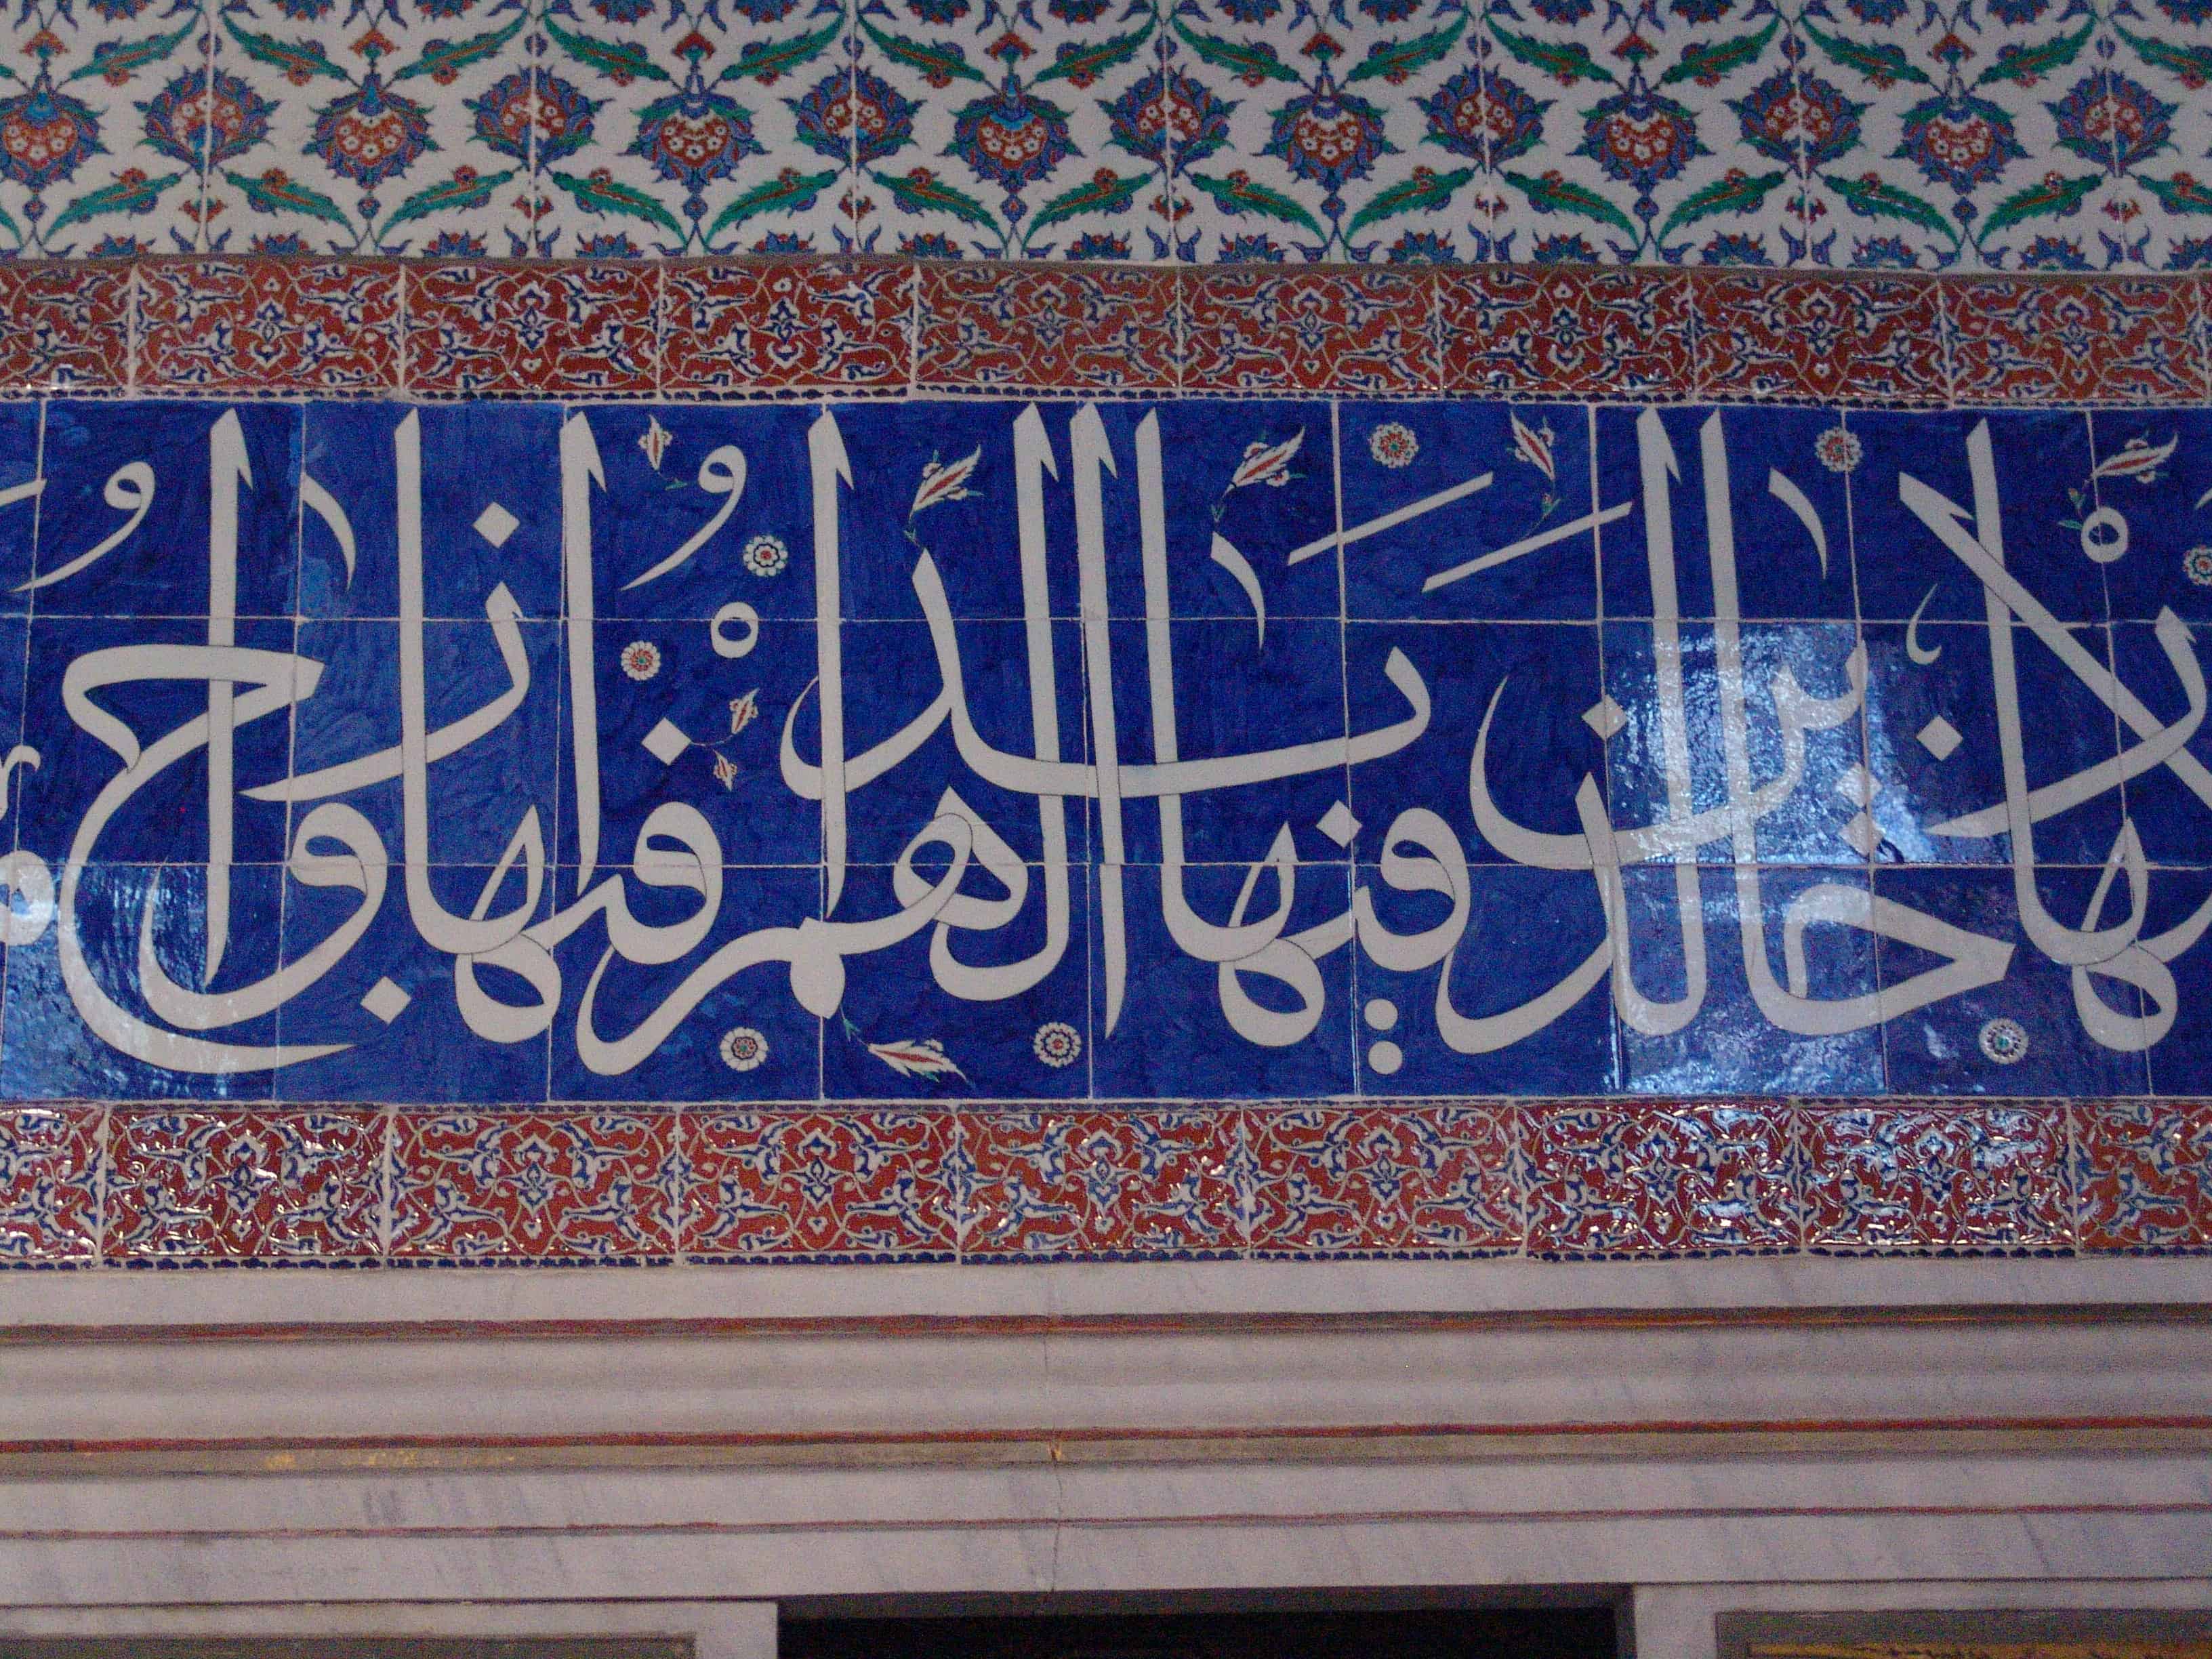 Tiled inscription in the Privy Chamber of Murad III in the Imperial Harem at Topkapi Palace in Istanbul, Turkey